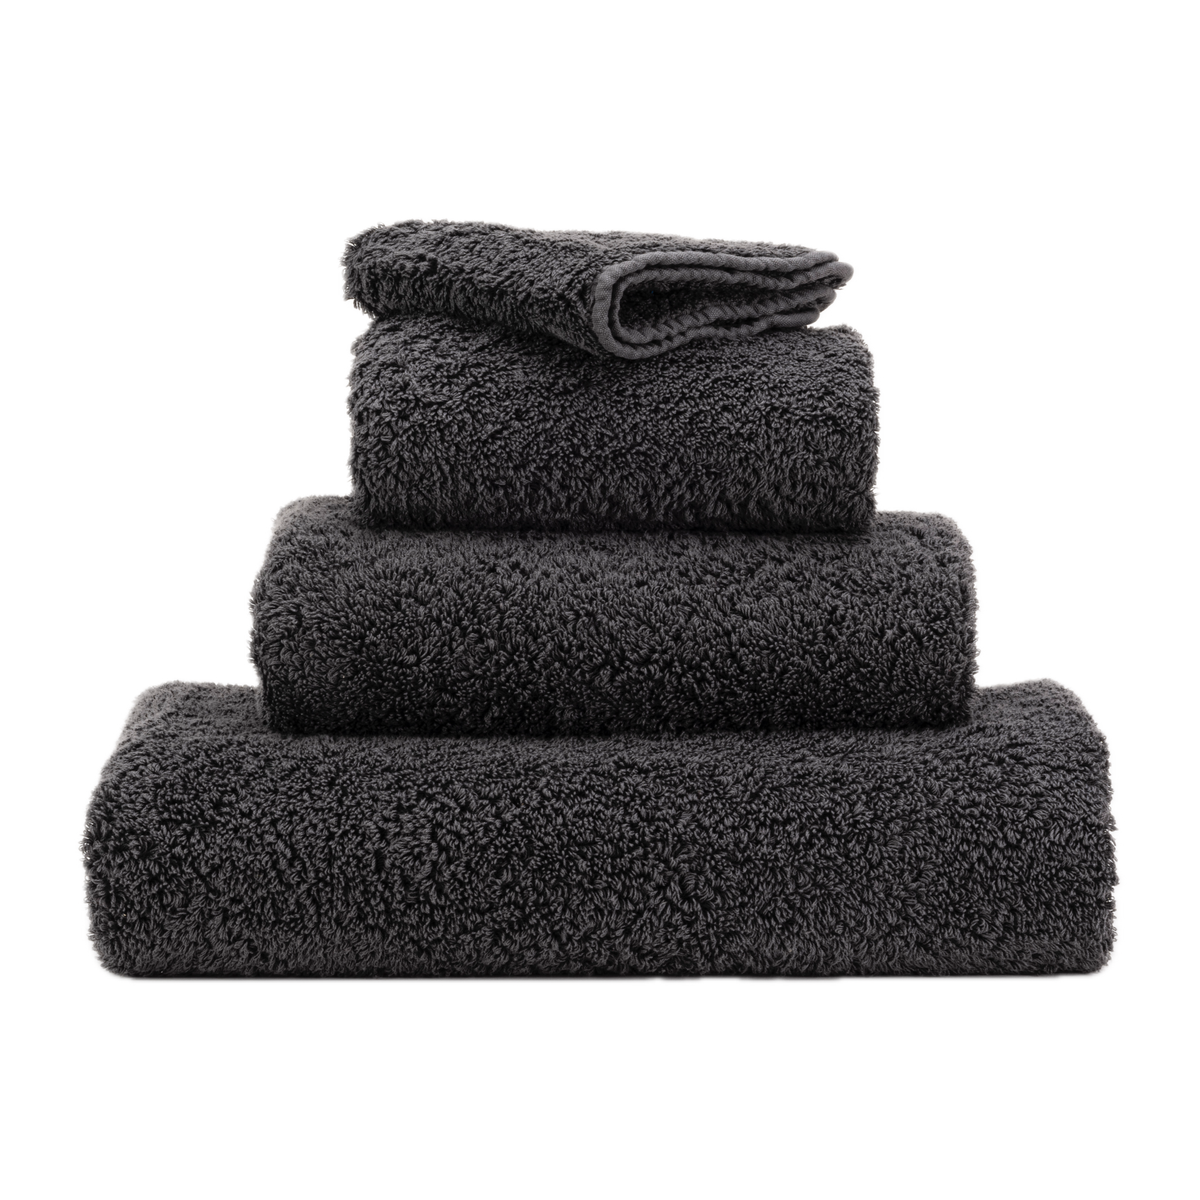 Stack of Abyss Super Pile Bath Towels in Volcan Color